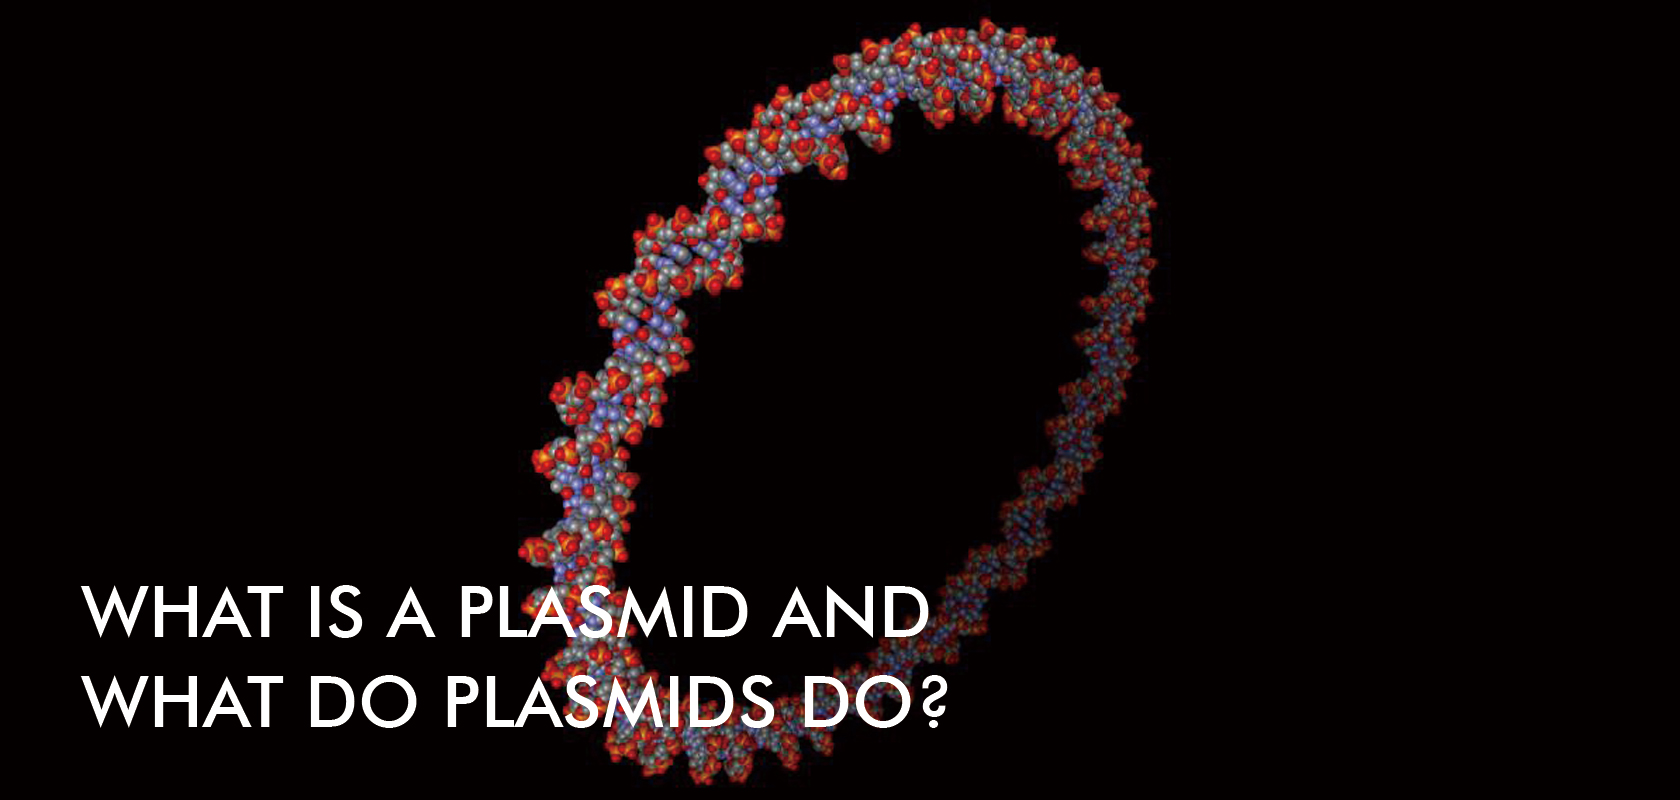 WHAT IS A PLASMID AND WHAT DO PLASMIDS DO?